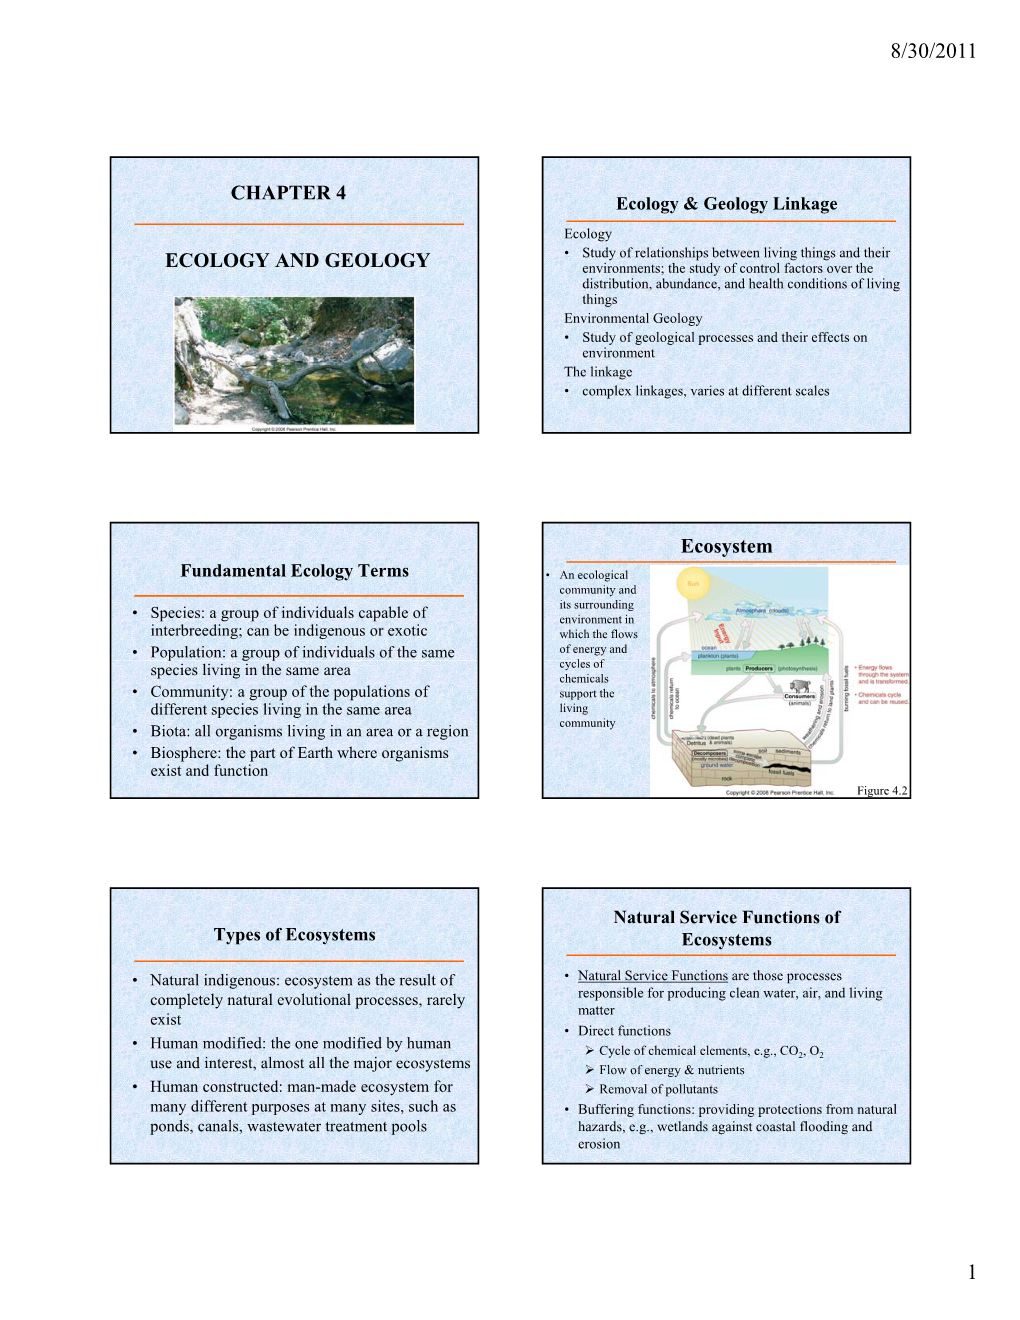 CHAPTER 4 ECOLOGY and GEOLOGY Ecosystem